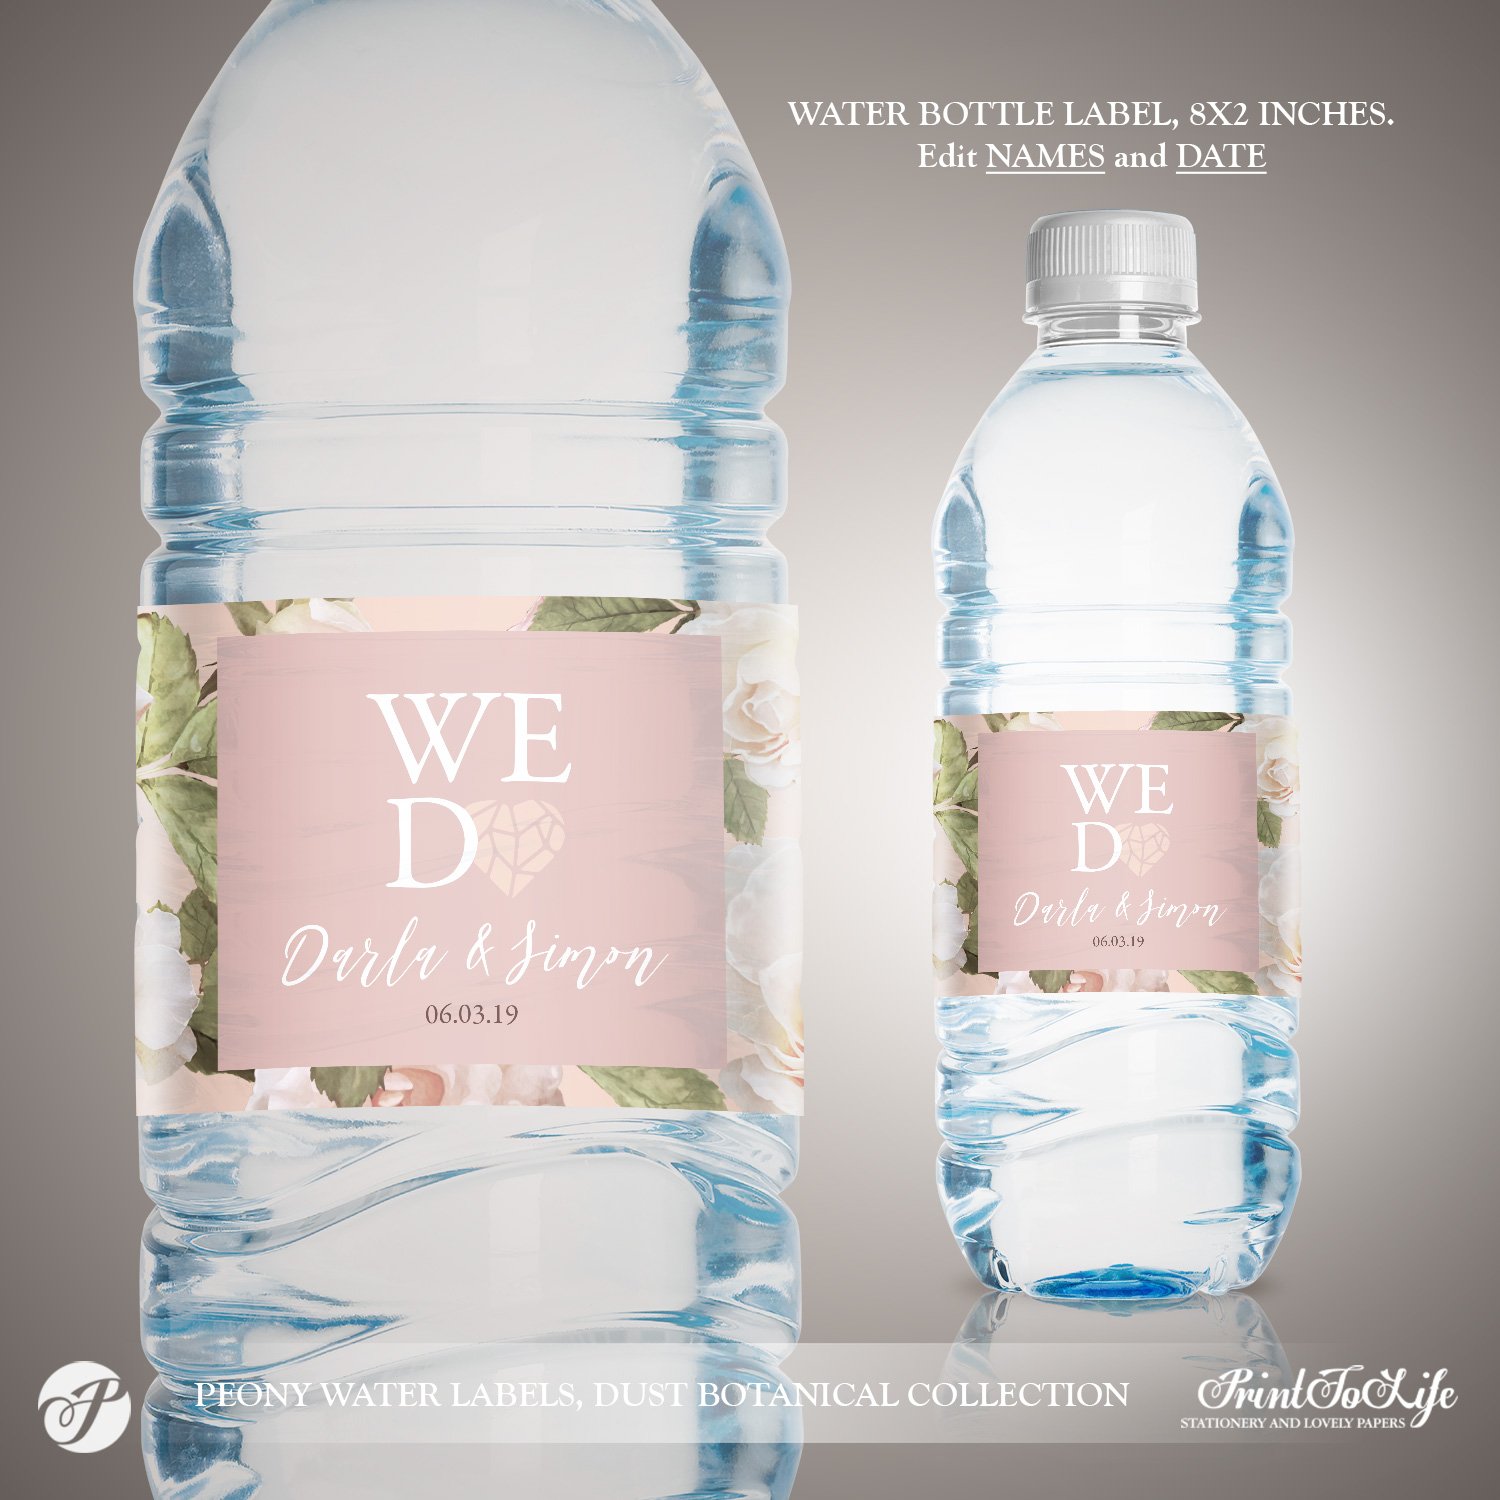 Peony Water Bottle Label Template #Dusty Pink Botanical Collection - by  Printolife Regarding Drink Bottle Label Template